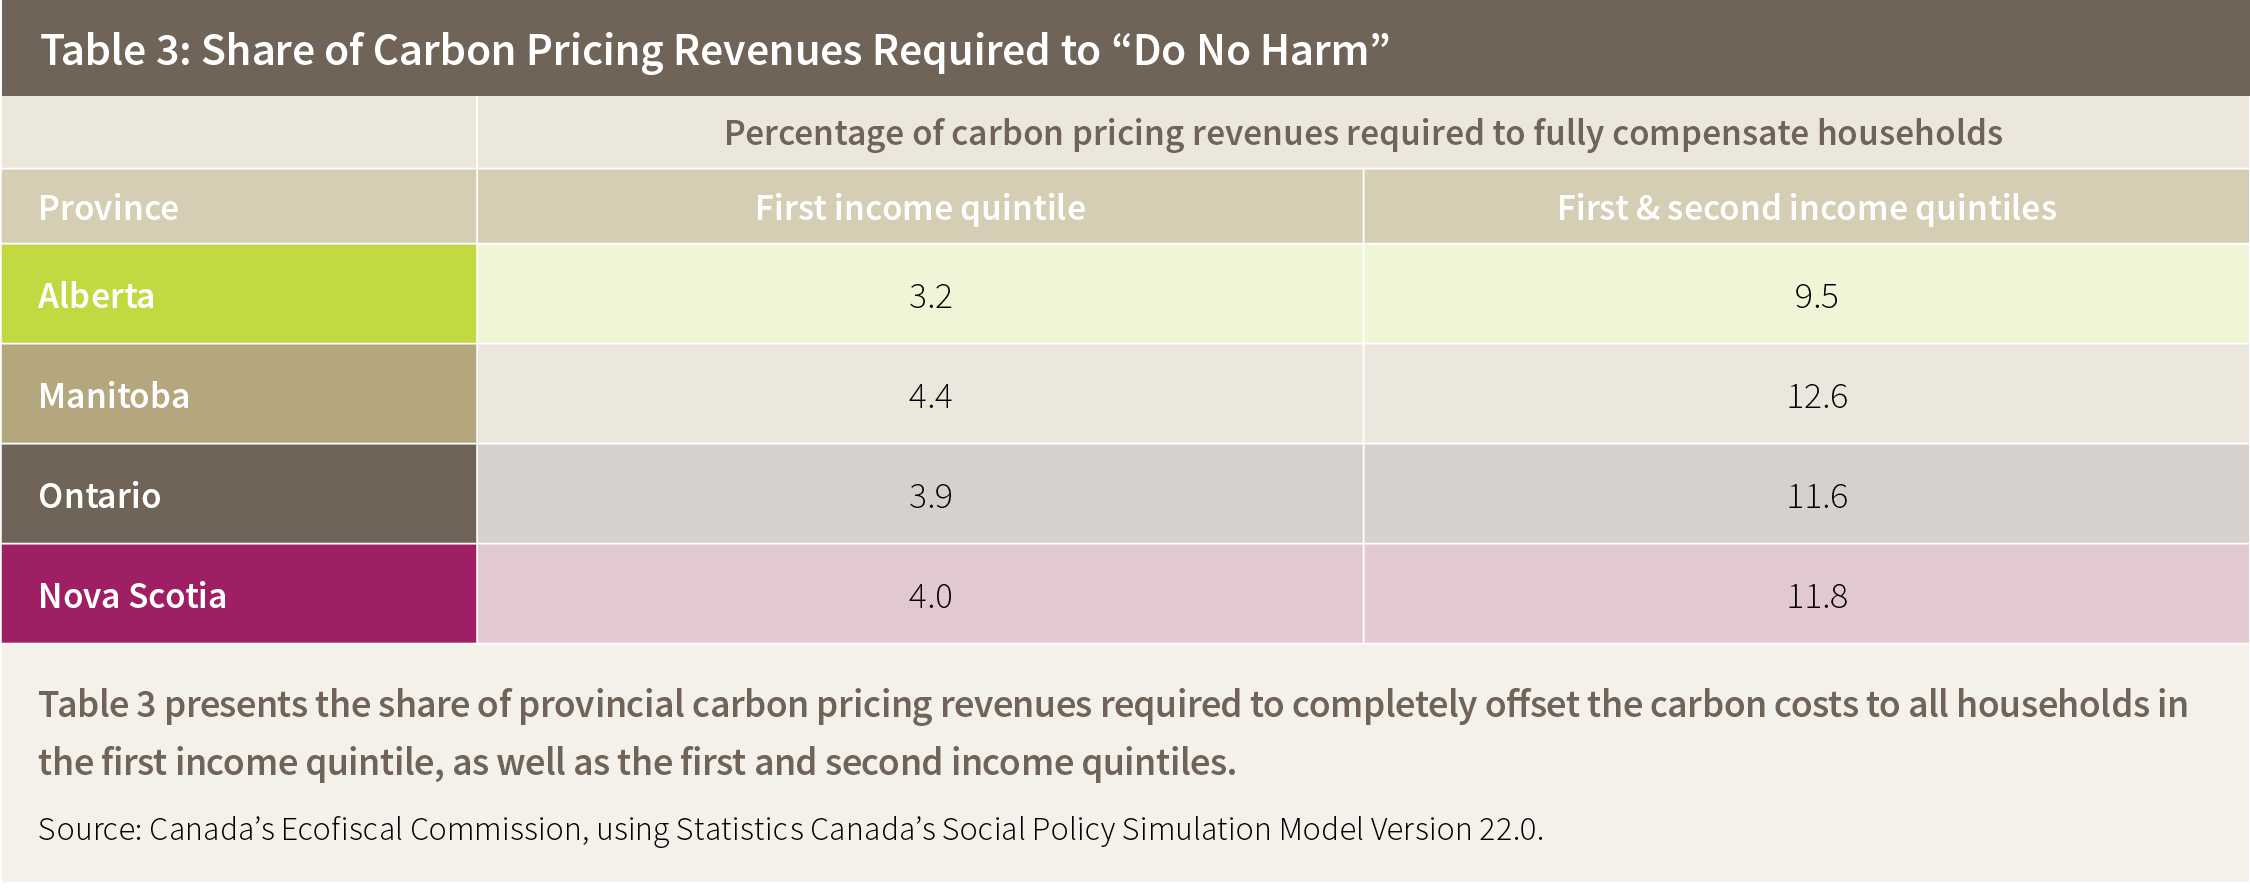 Table 3: Share of Carbon Pricing Revenues Required to “Do No Harm”